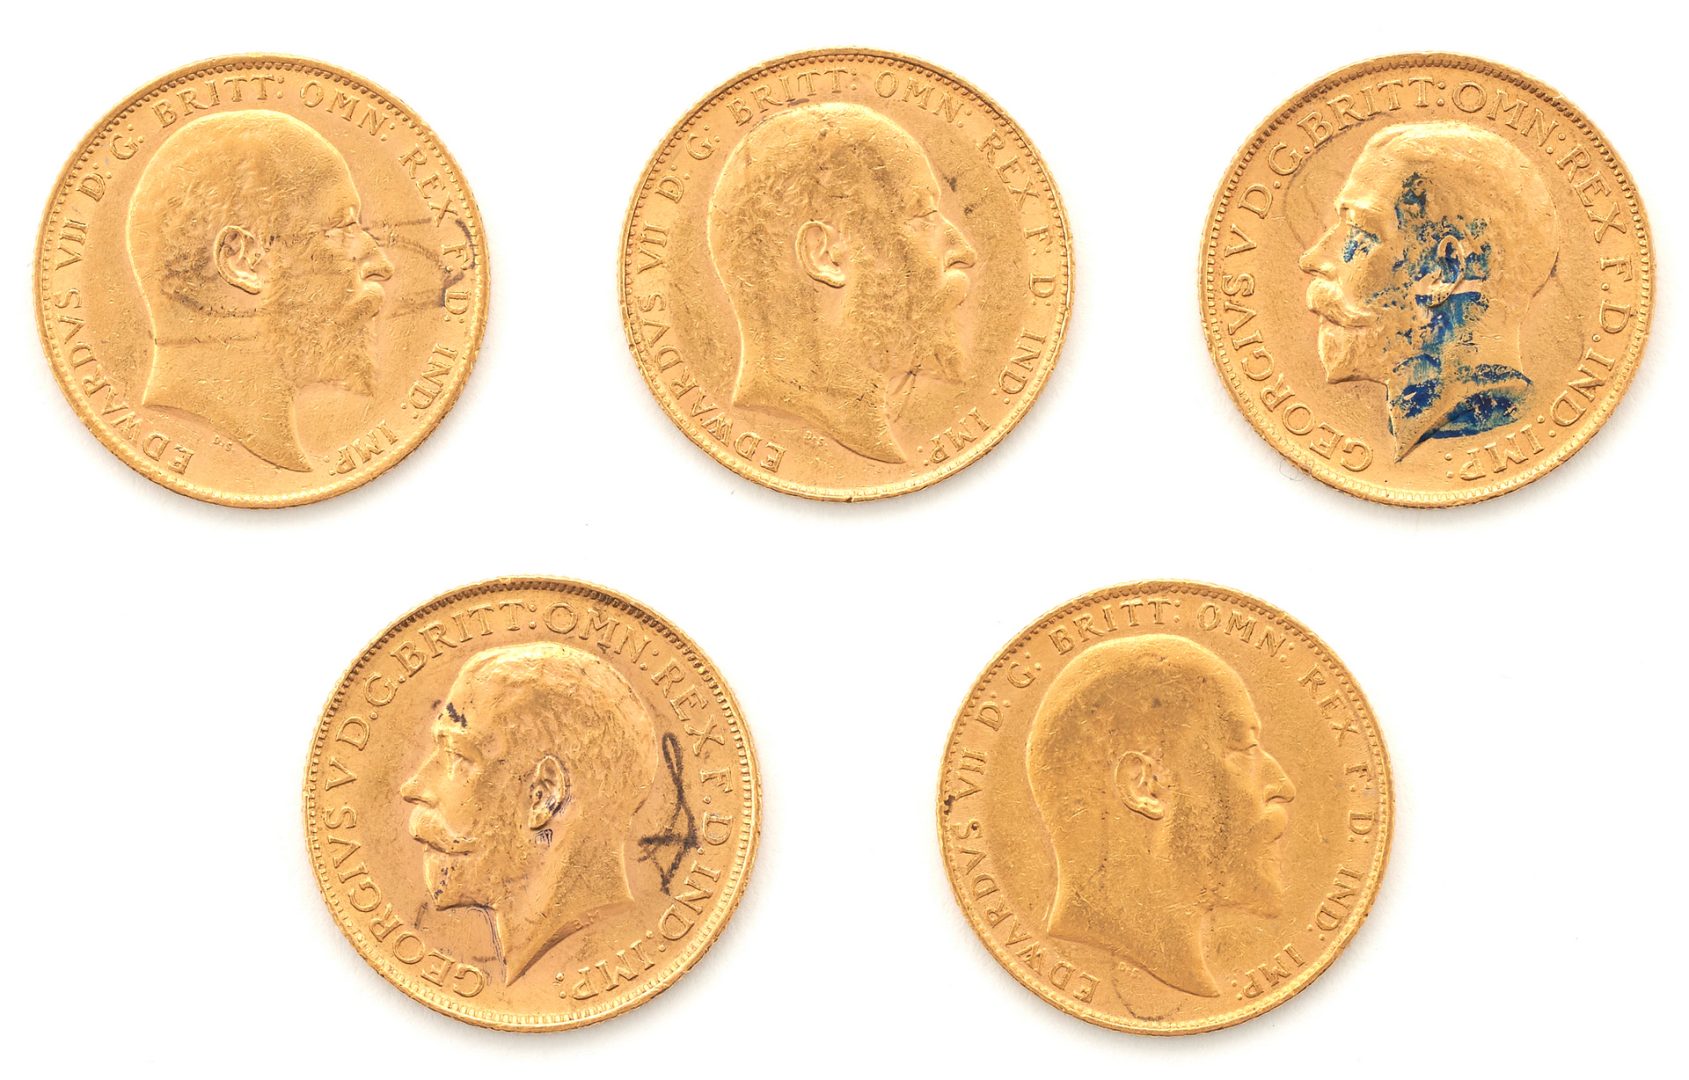 Lot 237: 5 English Gold Sovereigns, 1902-1912